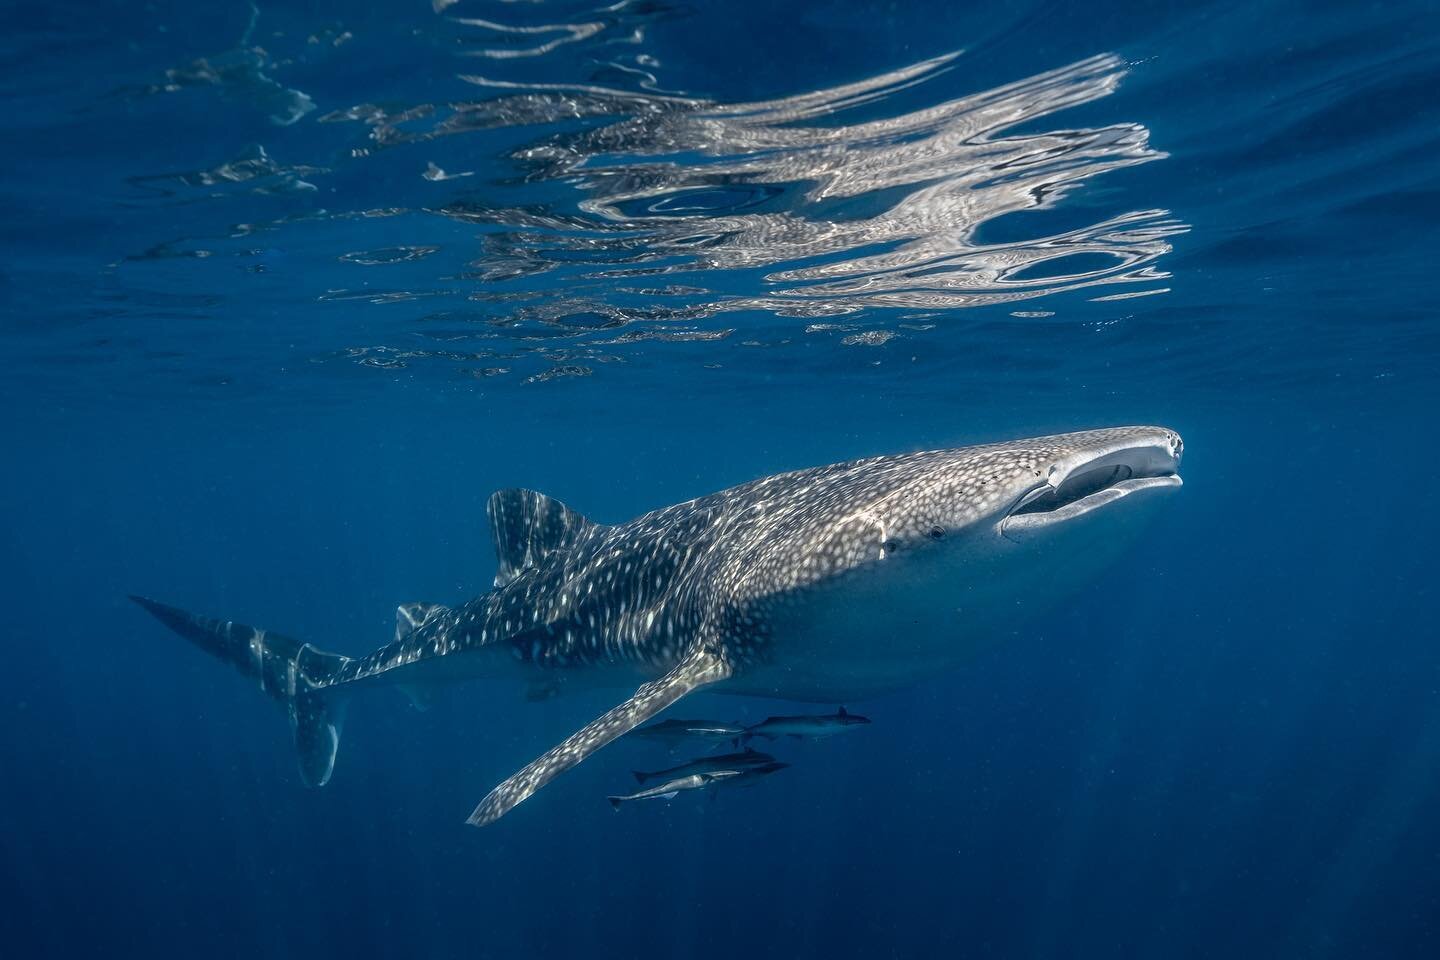 And just like that, our 2023 whale shark season has come to an end! What a great last month onboard @ningaloodiscovery with so many beautiful spotty fish! 🦈
It&rsquo;s been an absolute blast over the past 2 seasons photographing these animals on the